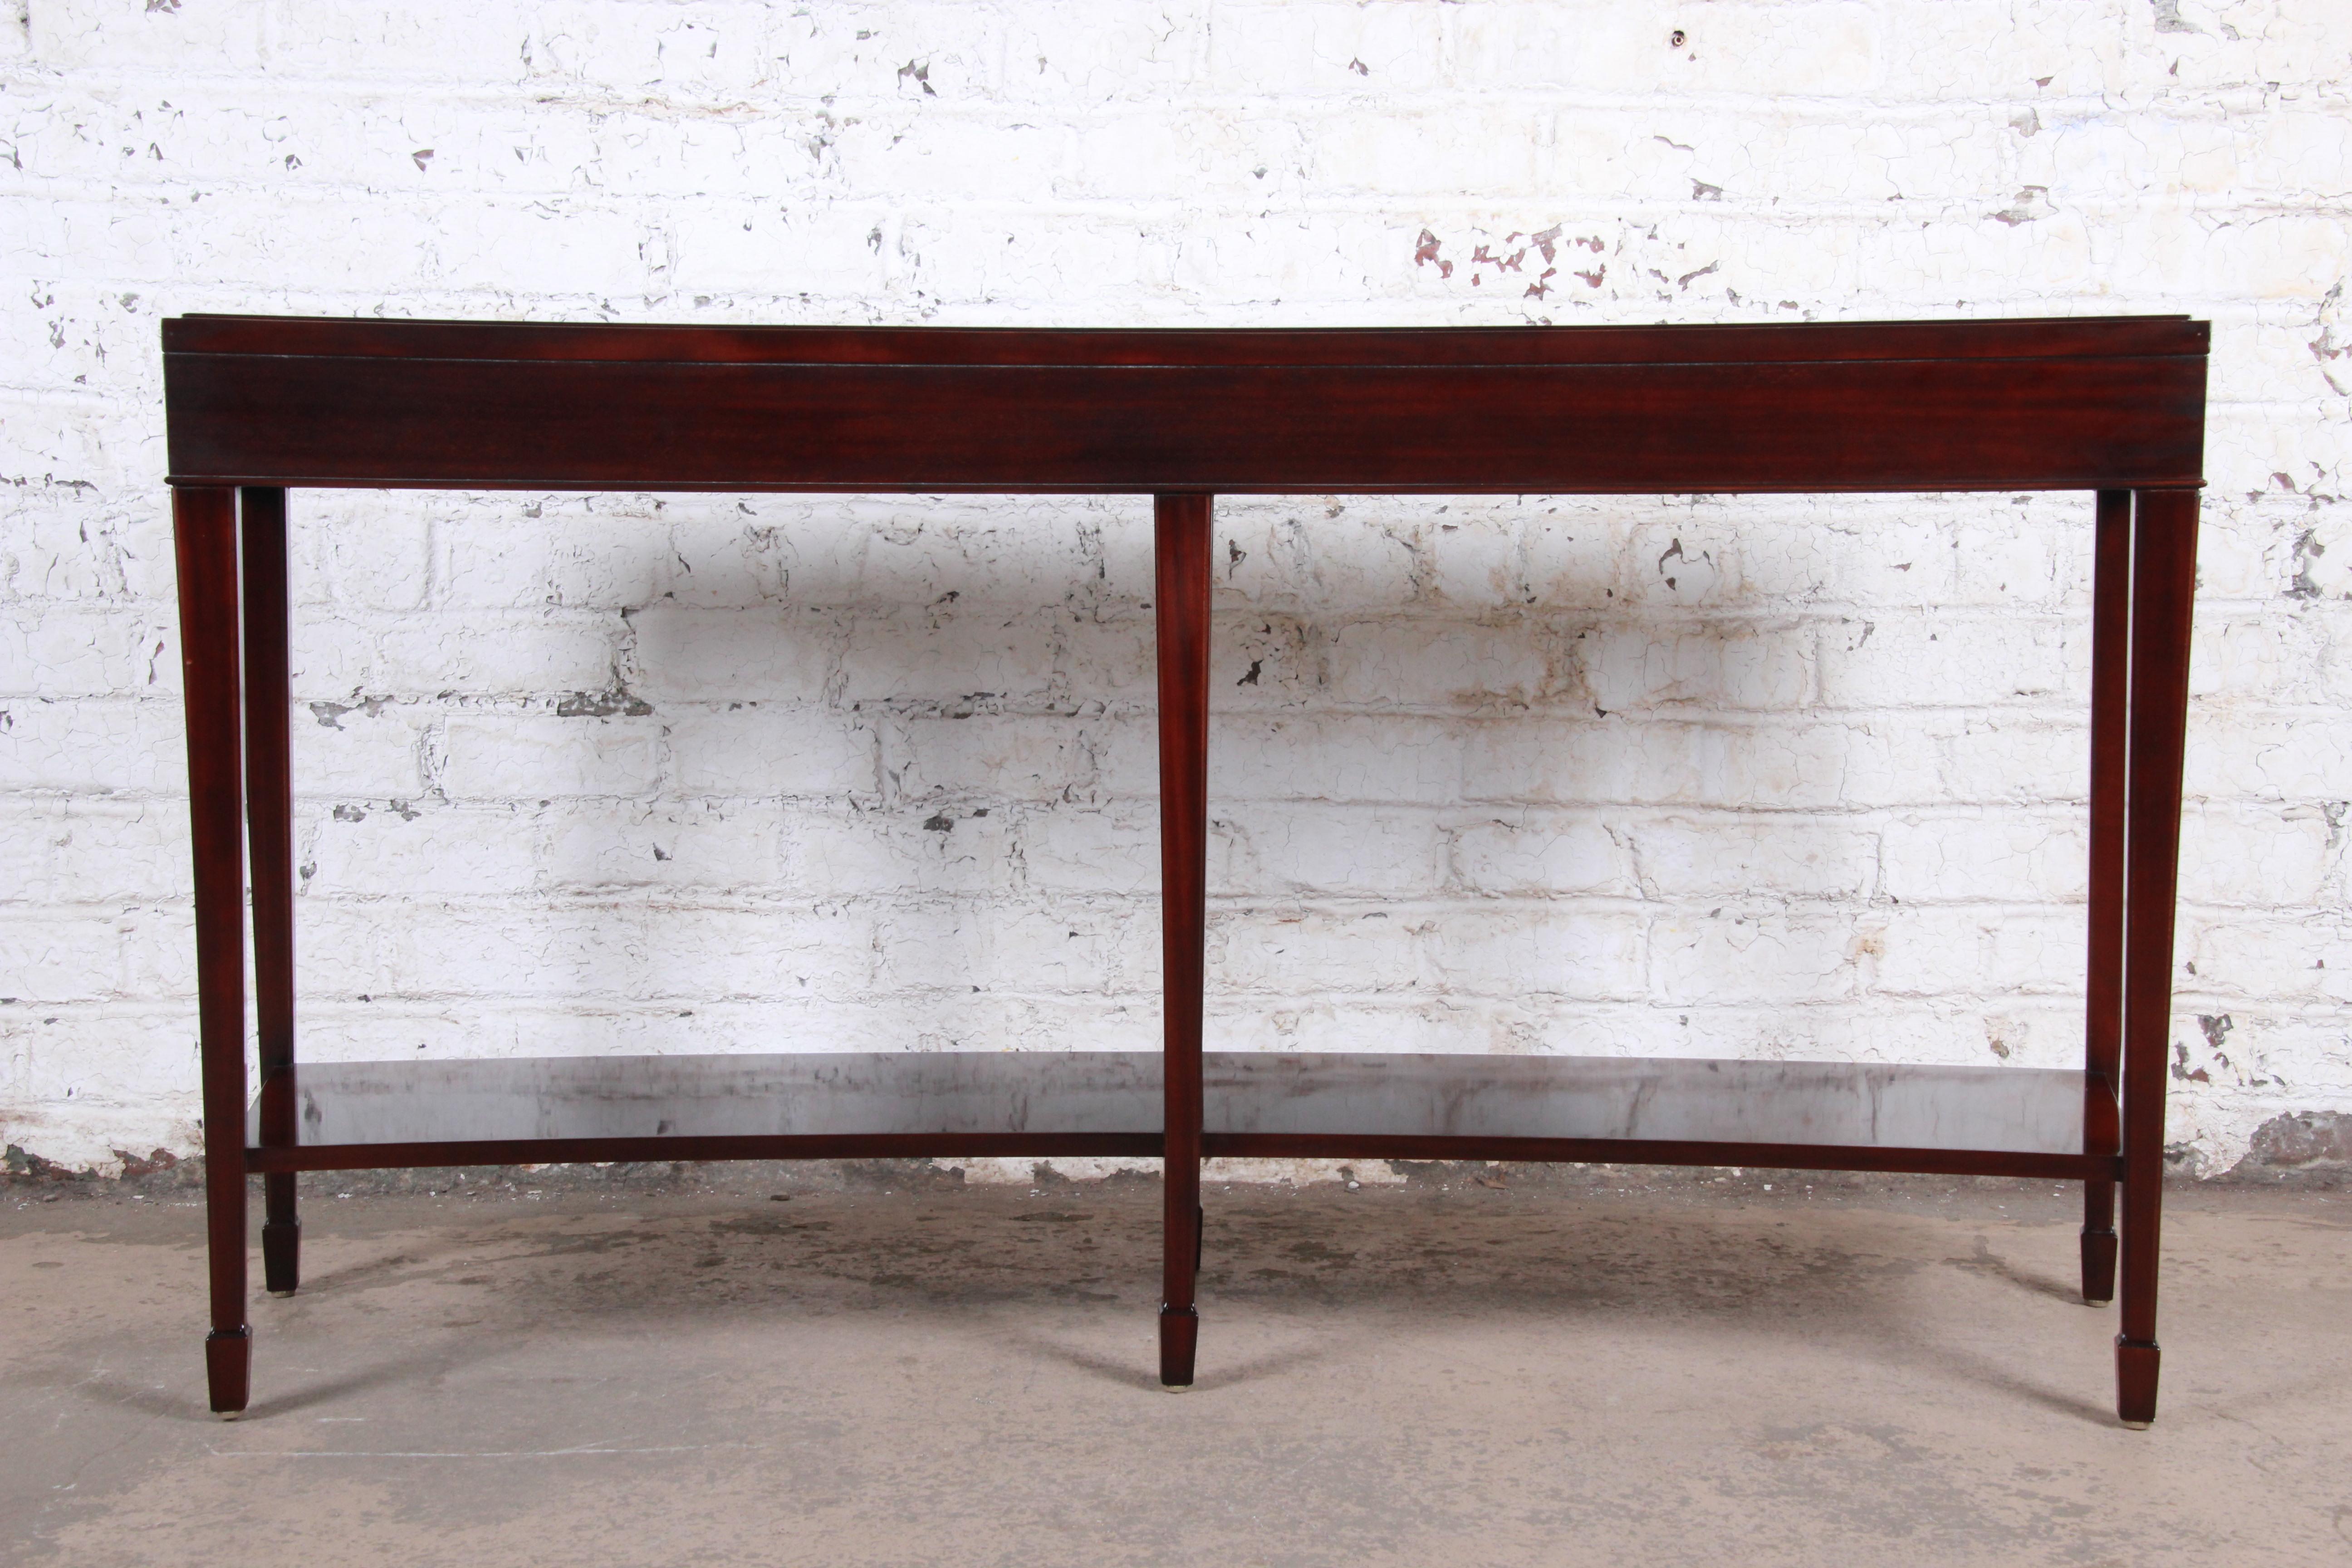 An exceptional modern dark mahogany curved console or sofa table

Designed by Barbara Barry for Baker Furniture

USA, Circa 1990s

Measures: 64